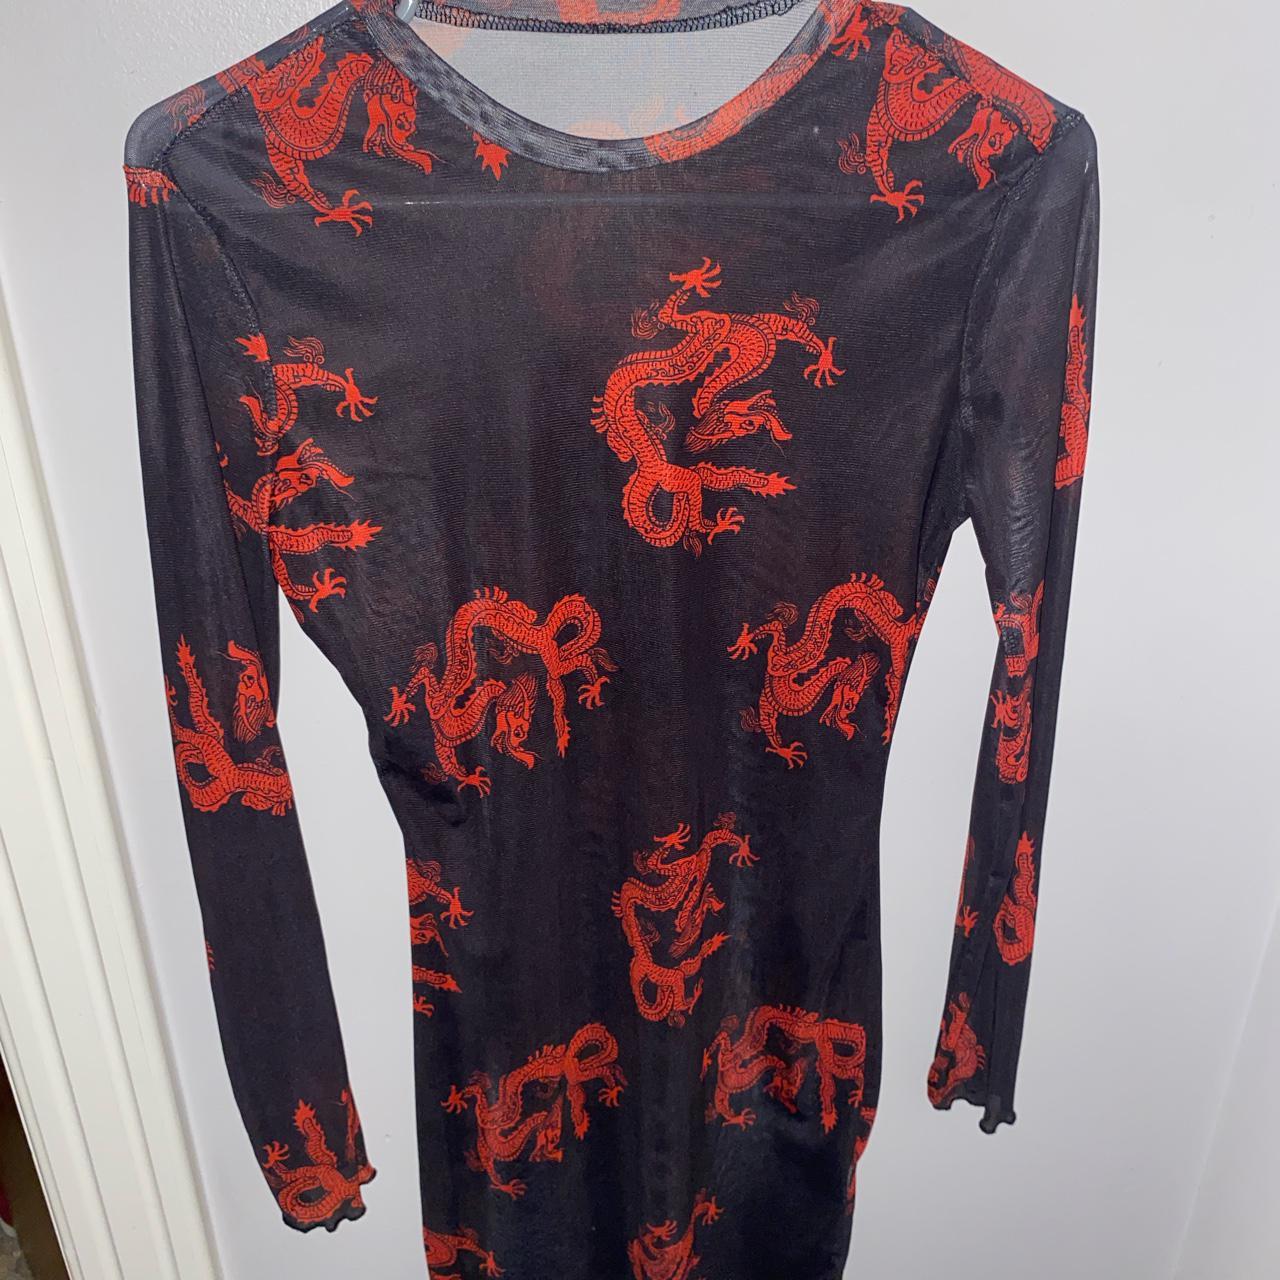 Mesh see-through dress. Has dragons on it, and it’s... - Depop